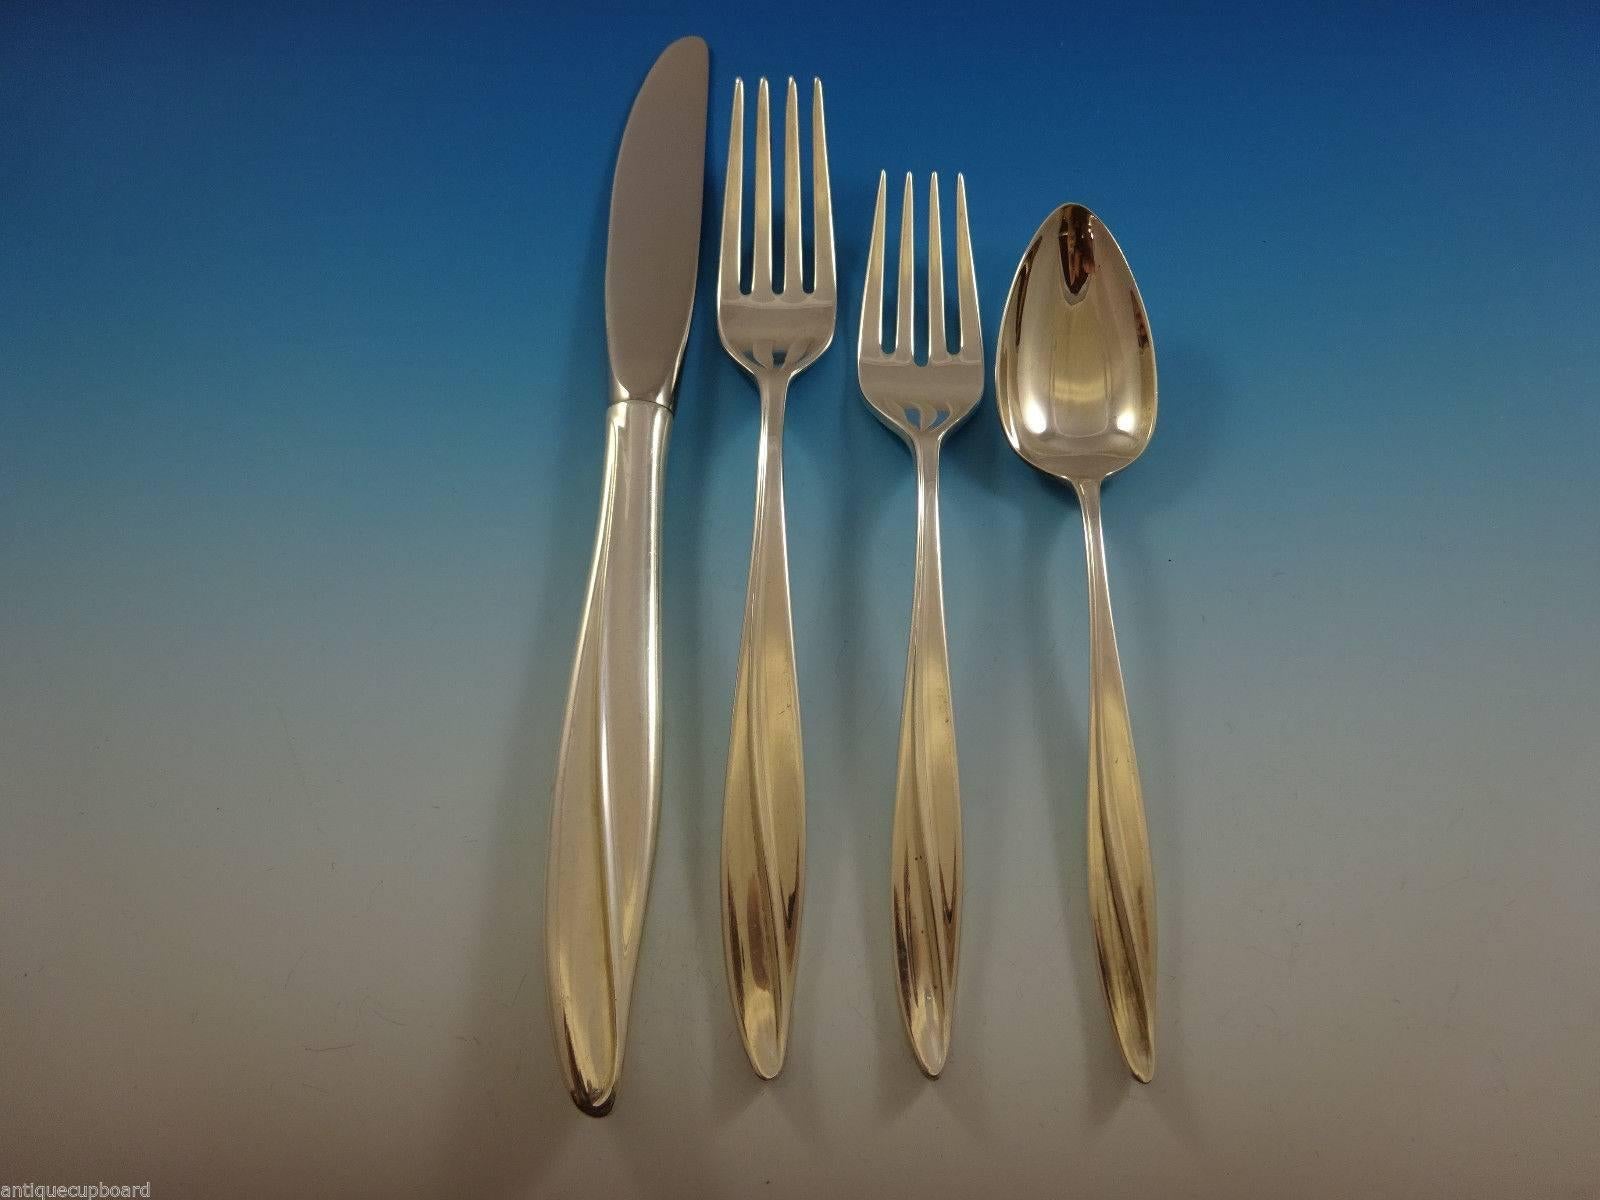 Mid-Century Modern Firelight by Gorham sterling silver flatware set of 31 pieces. Great starter set. This set includes:

Six knives, 8 7/8